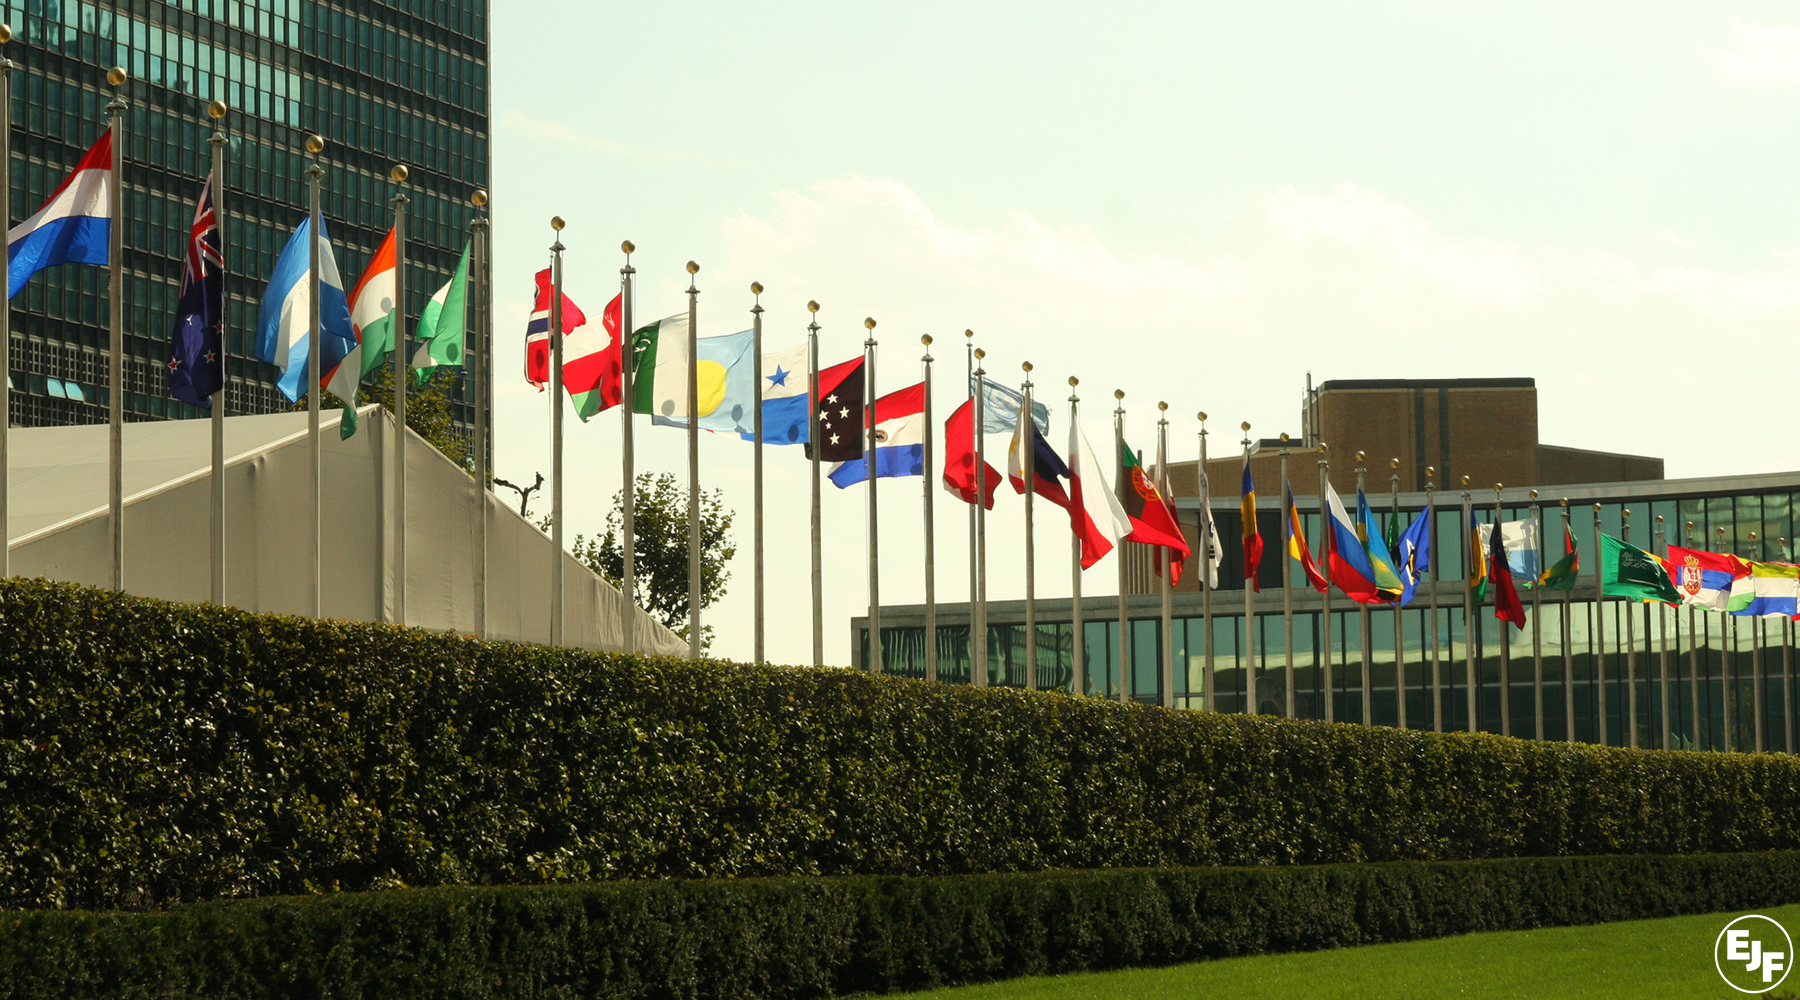 Taking stock of the UN Climate Summit 2014